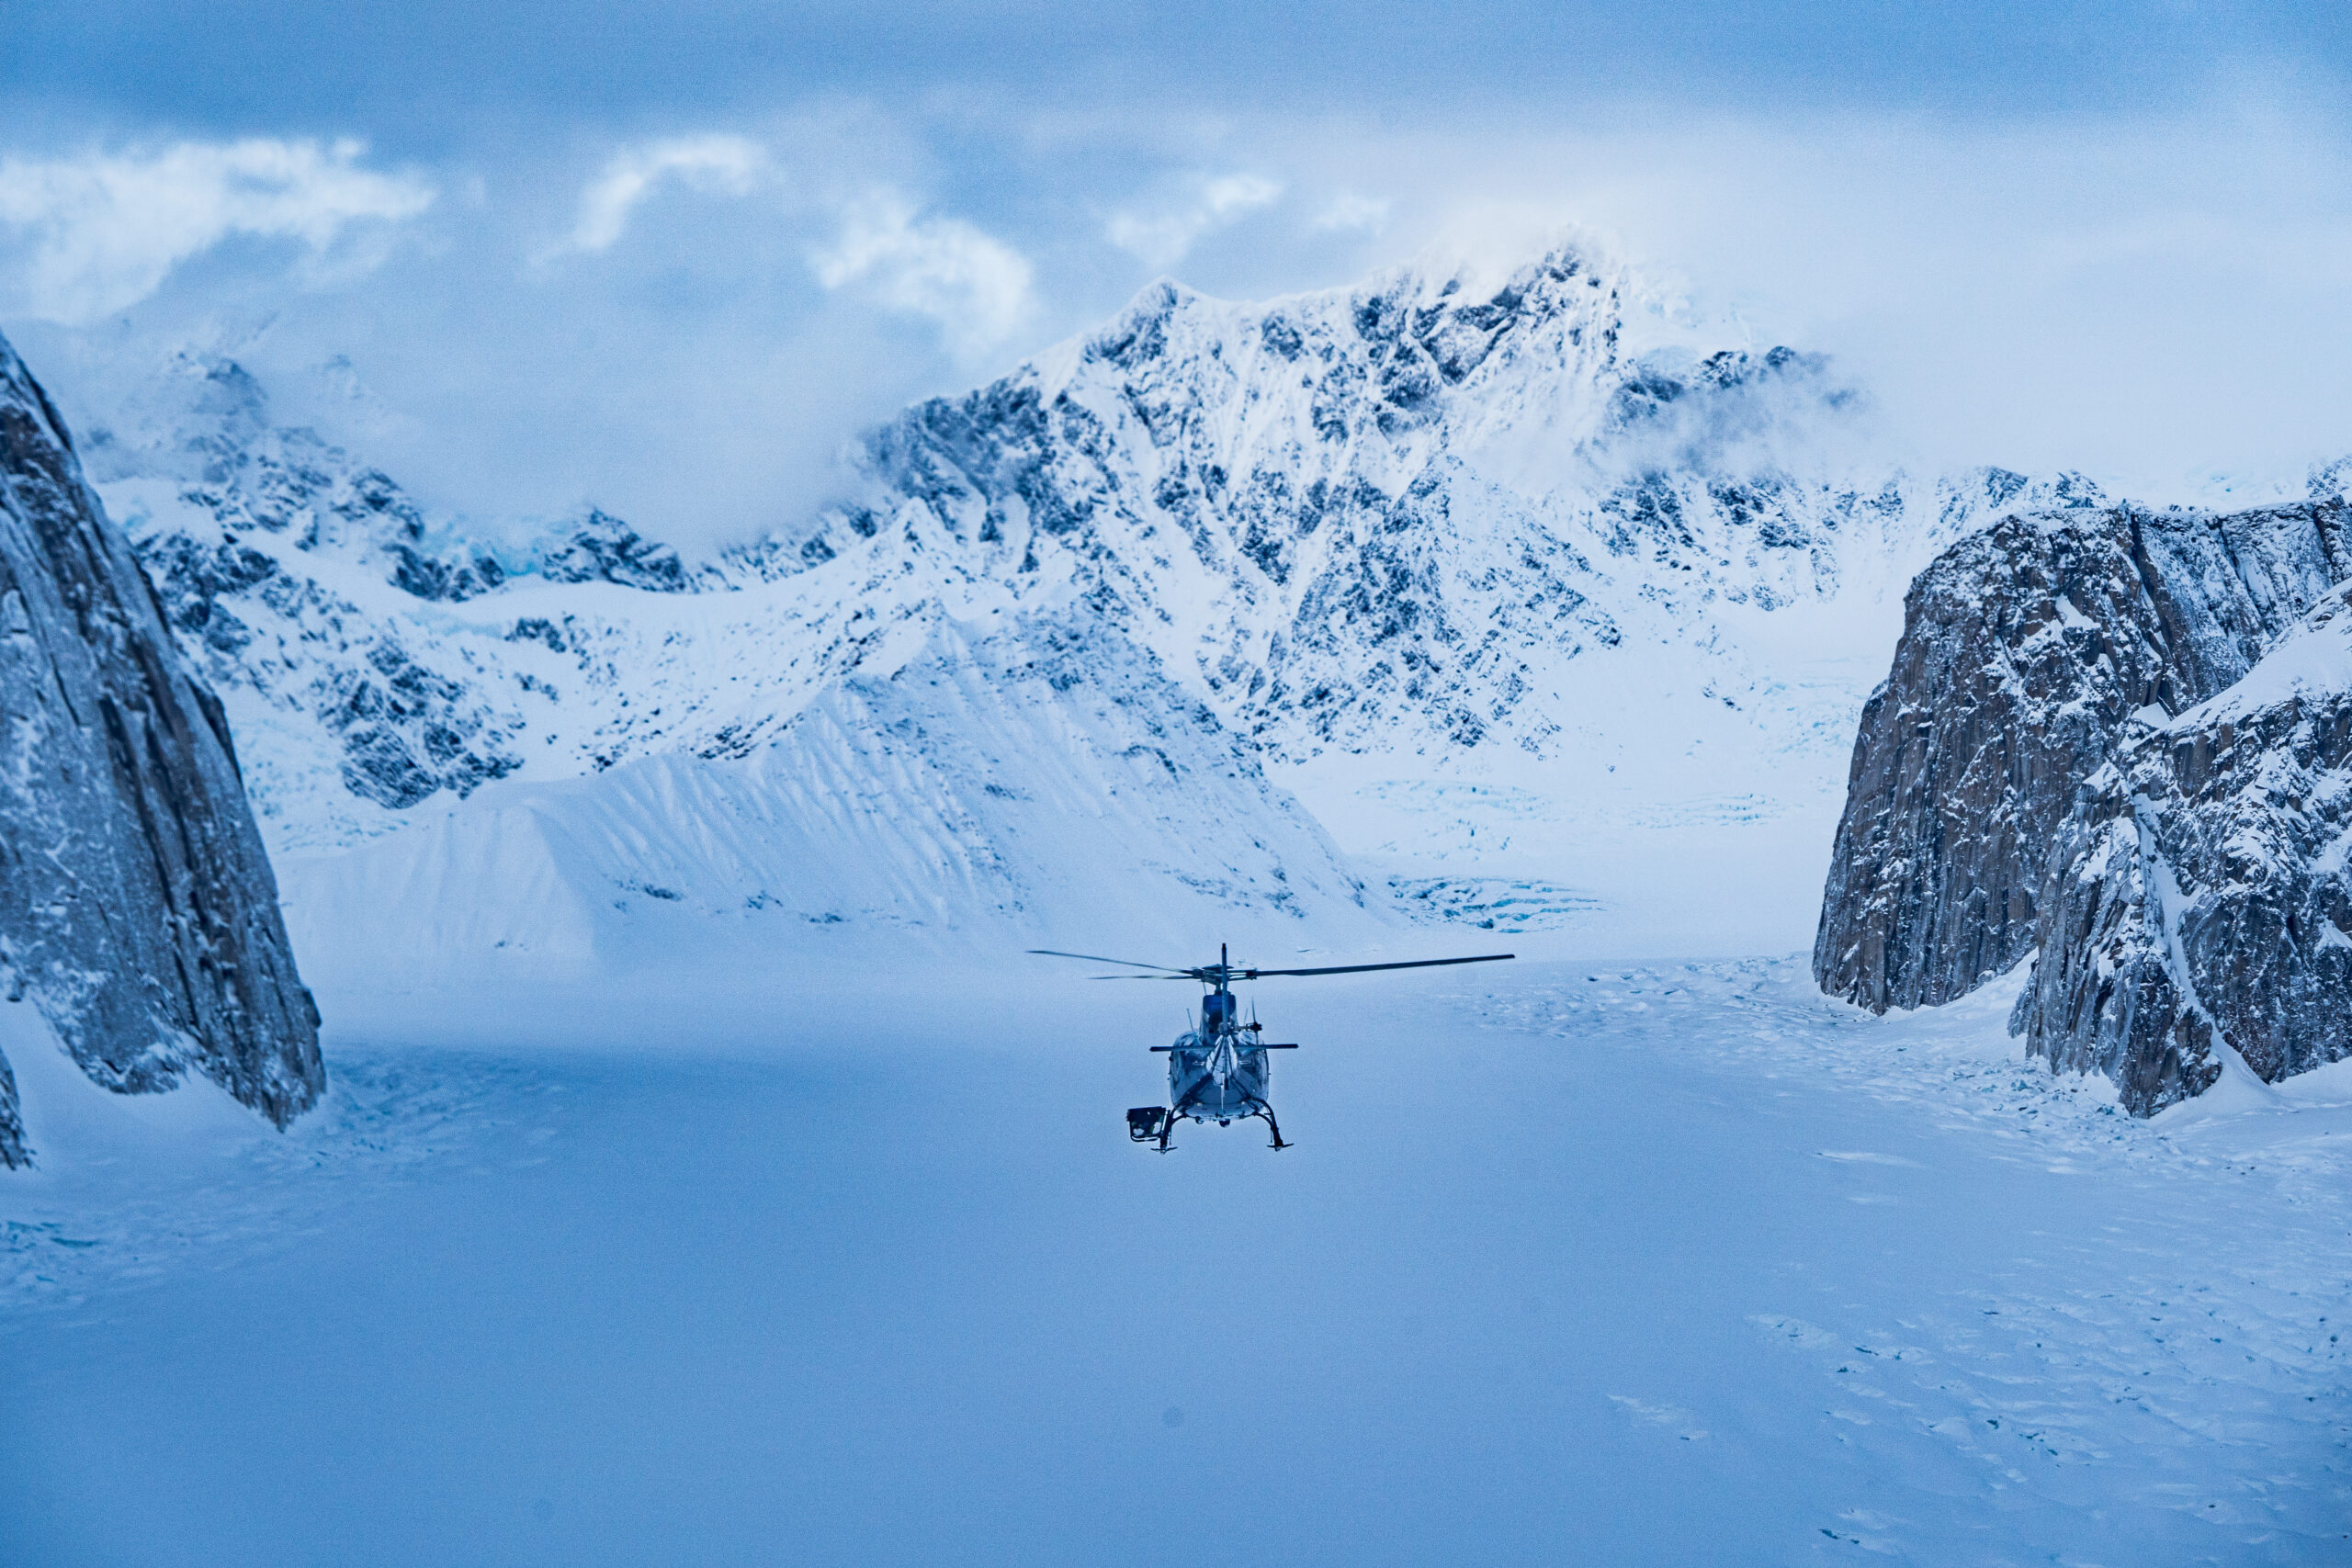 Third Edge Heli  Ripping Dream Lines in Alaska on a Private Heli